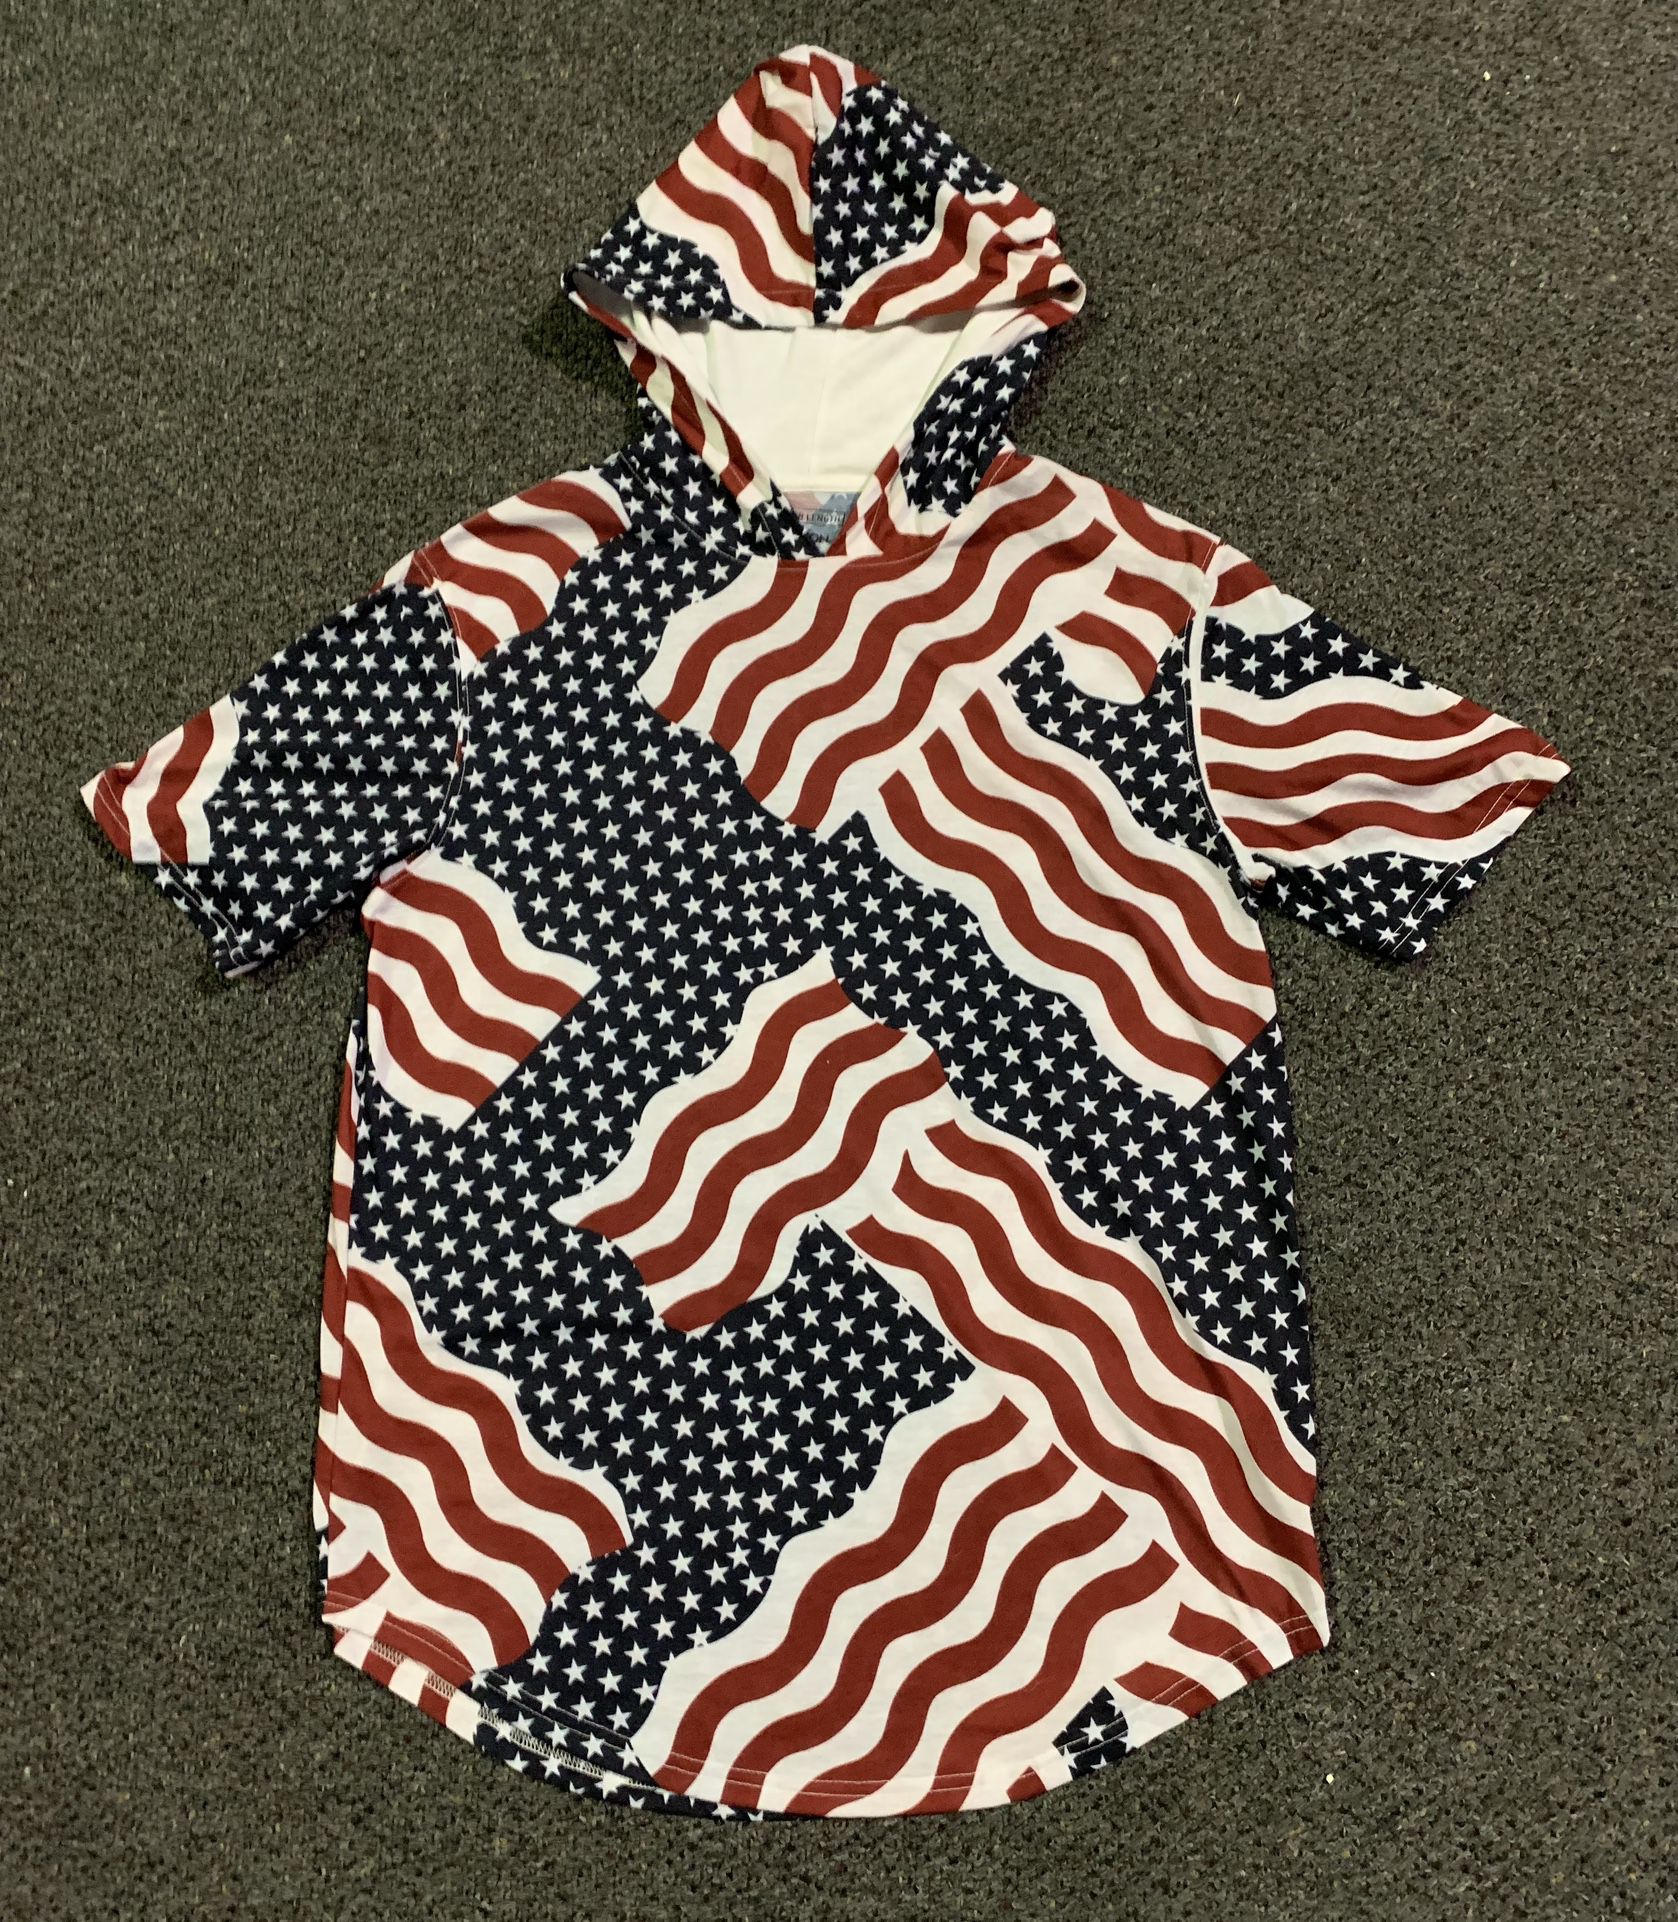 Carbon womens size large Patriotic 4th of July hooded tunic top shirt - worn once like new 